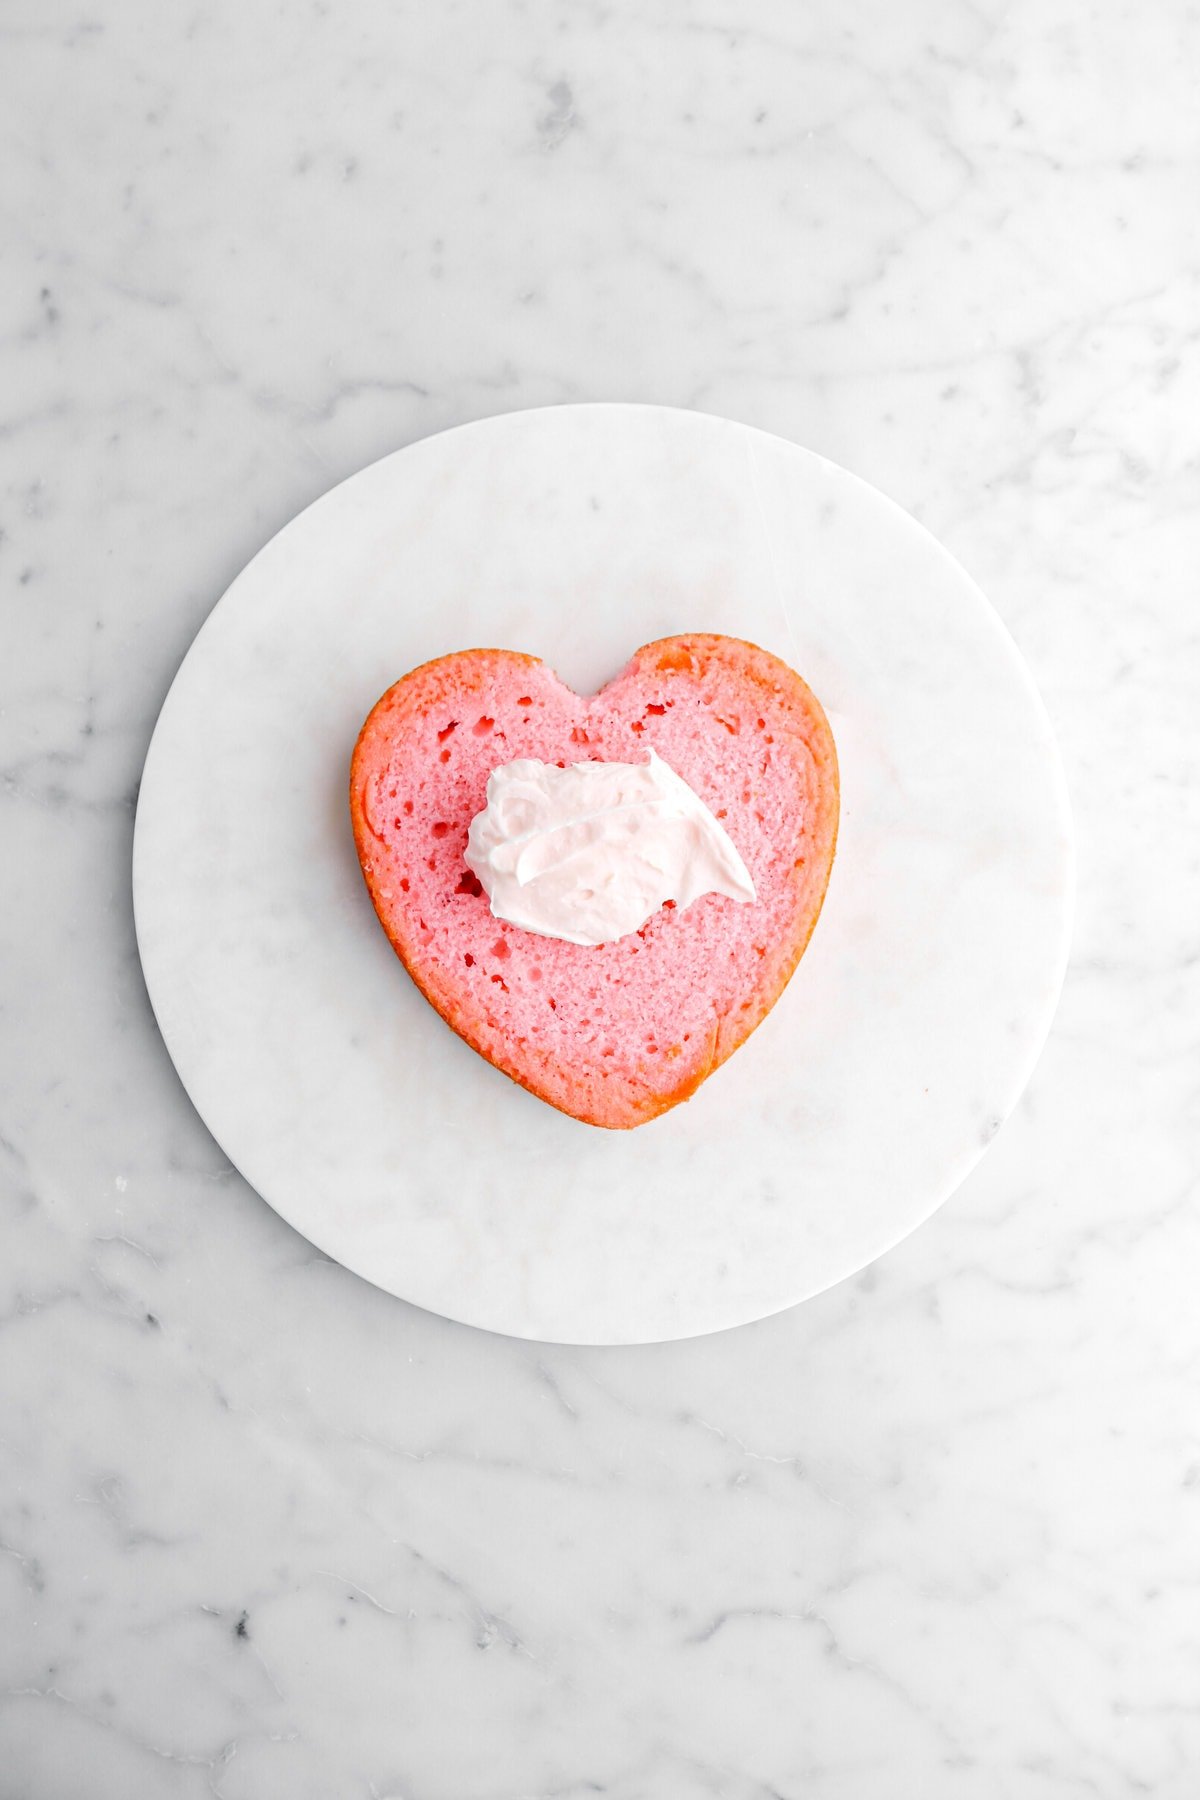 pink heart shaped cake on marble surface with pink cream cheese frosting dolloped on top.